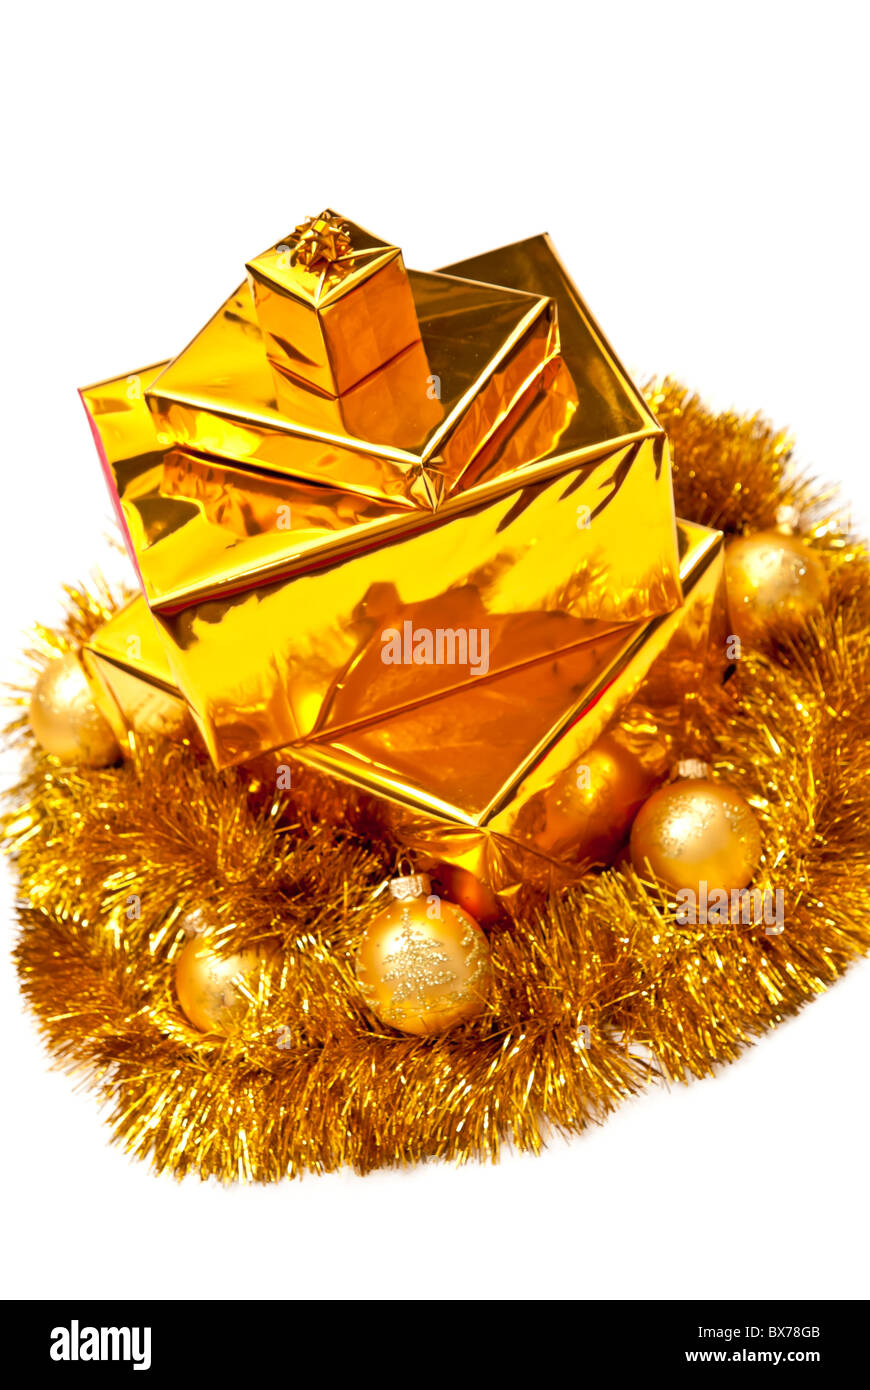 golden gifts Stock Photo